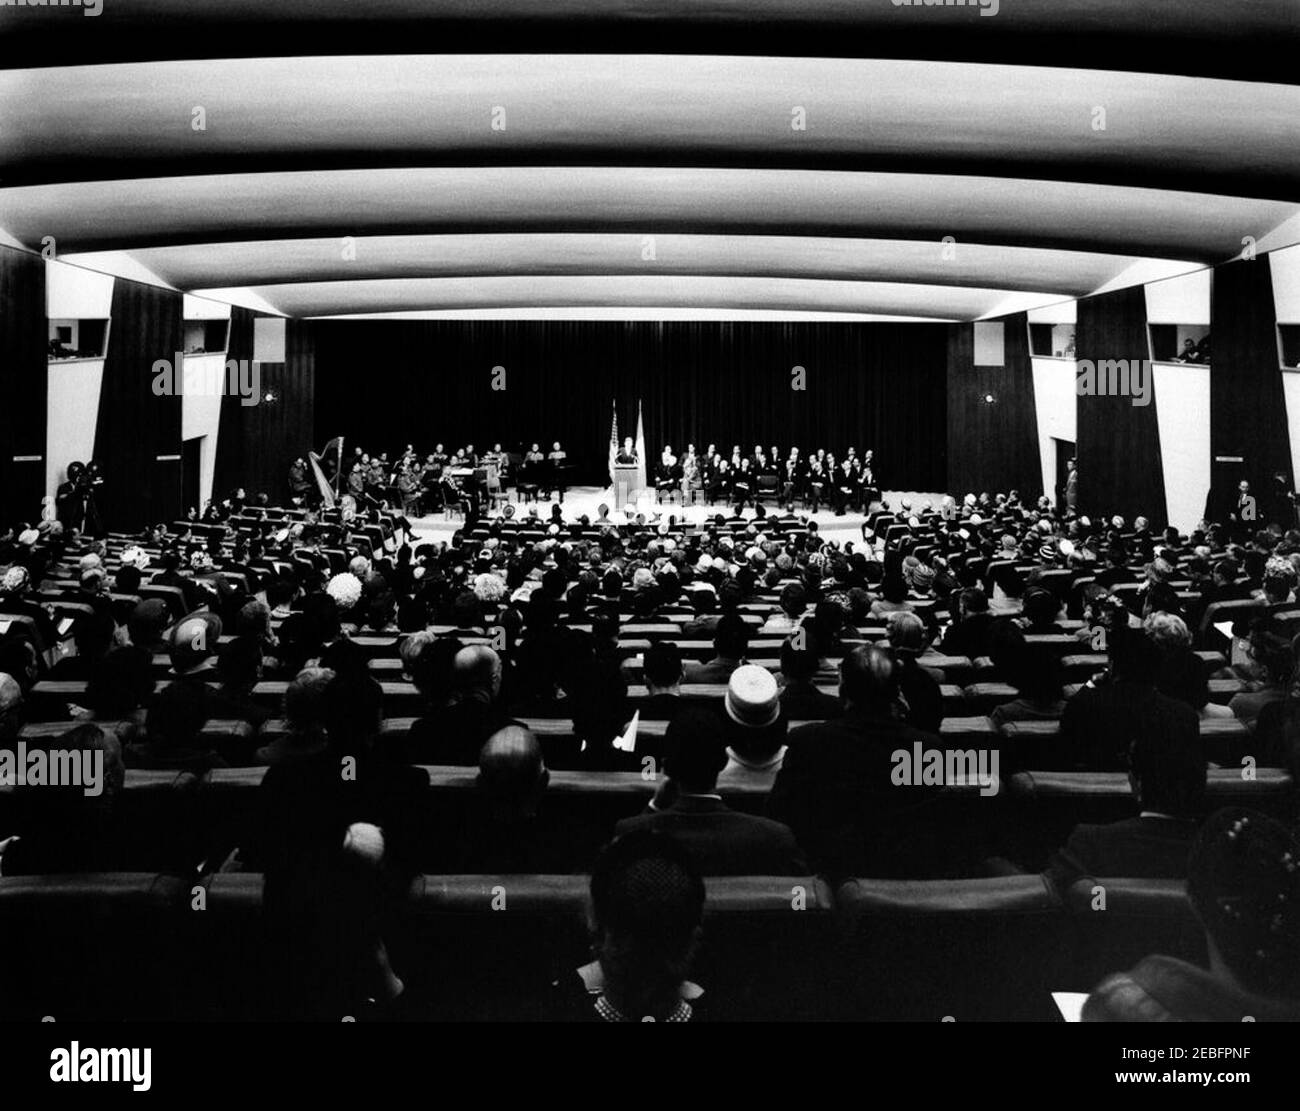 Ceremony celebrating the Unification of Italy, 10:31AM. Ceremony celebrating the Unification of Italy. Wide shot, from the back of the auditorium; President John F. Kennedy speaks from the lectern; attendees listen while seated in the audience and onstage; musicians and members of the United States Marine Band sit onstage at left. State Department Auditorium, Washington, D.C. Stock Photo